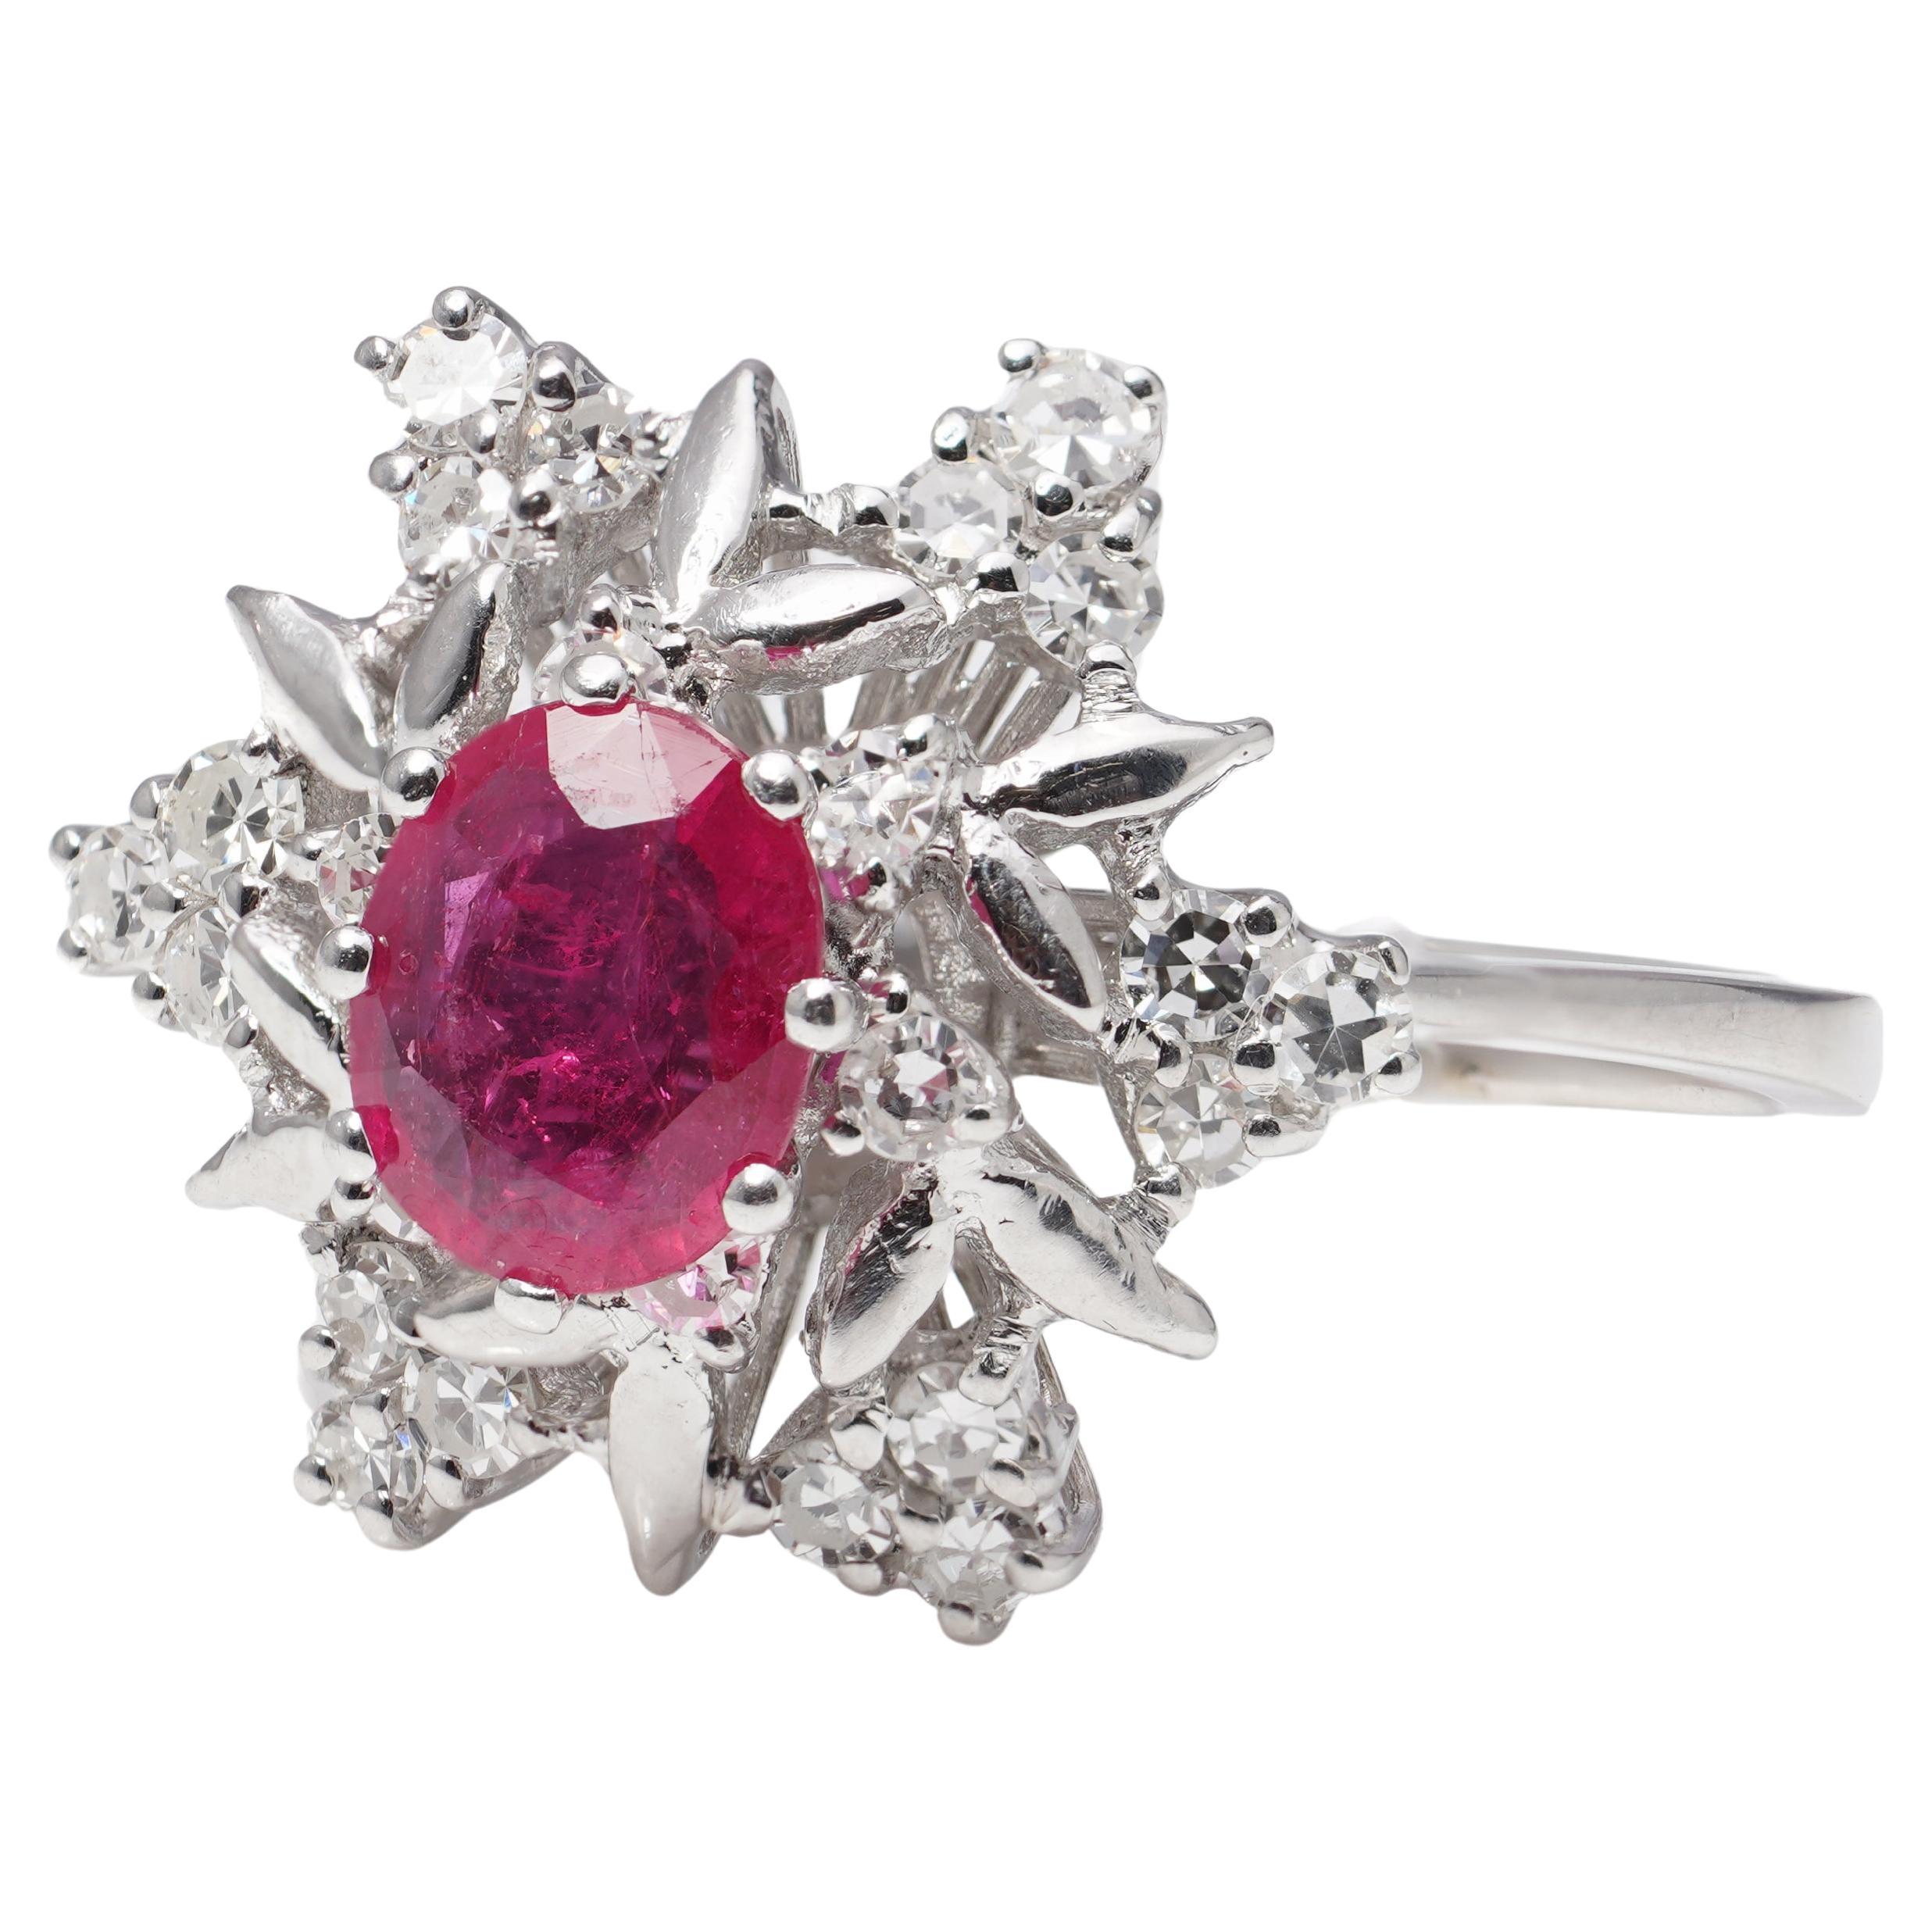 Looking for a cluster ring that's dripping in vintage glamour? Introducing our vintage 18kt. white gold 1.00 ct. ruby cluster ring! This beautiful piece is surrounded by 0.72 cts. of brilliant-cut diamonds.
With a timeless flower cluster design,